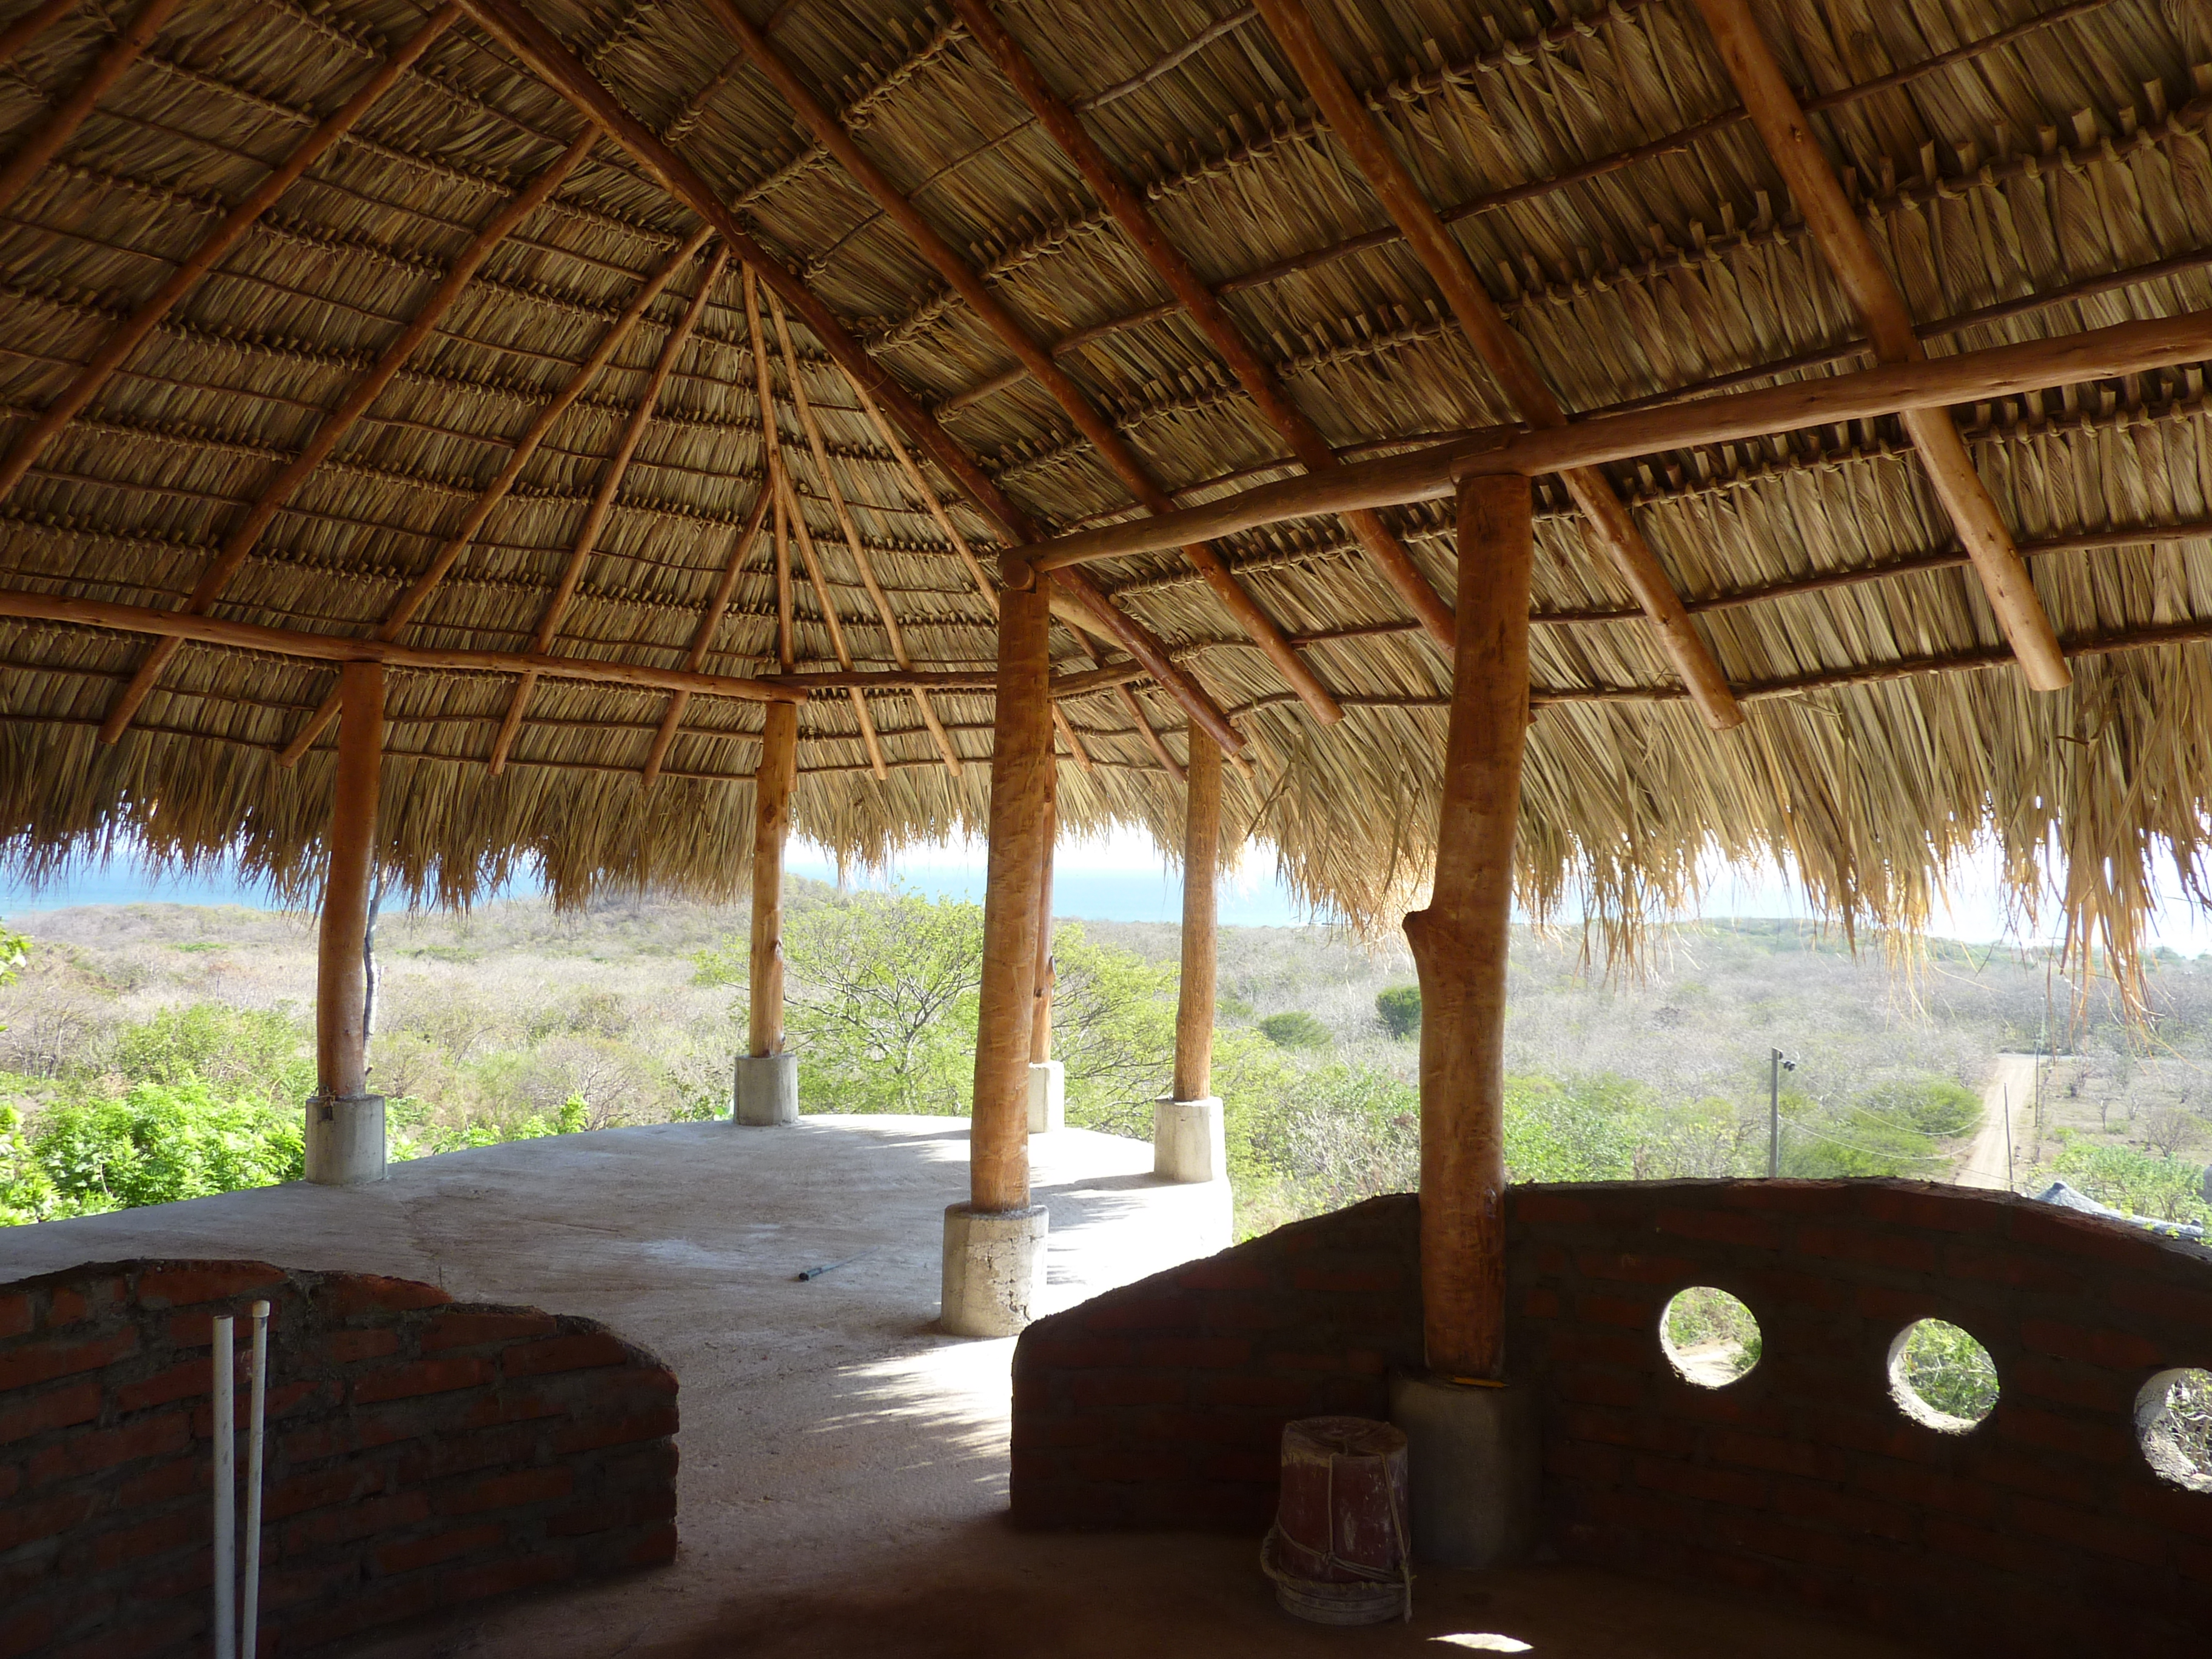 Sustainable building in Nicaragua (click to enlarge)